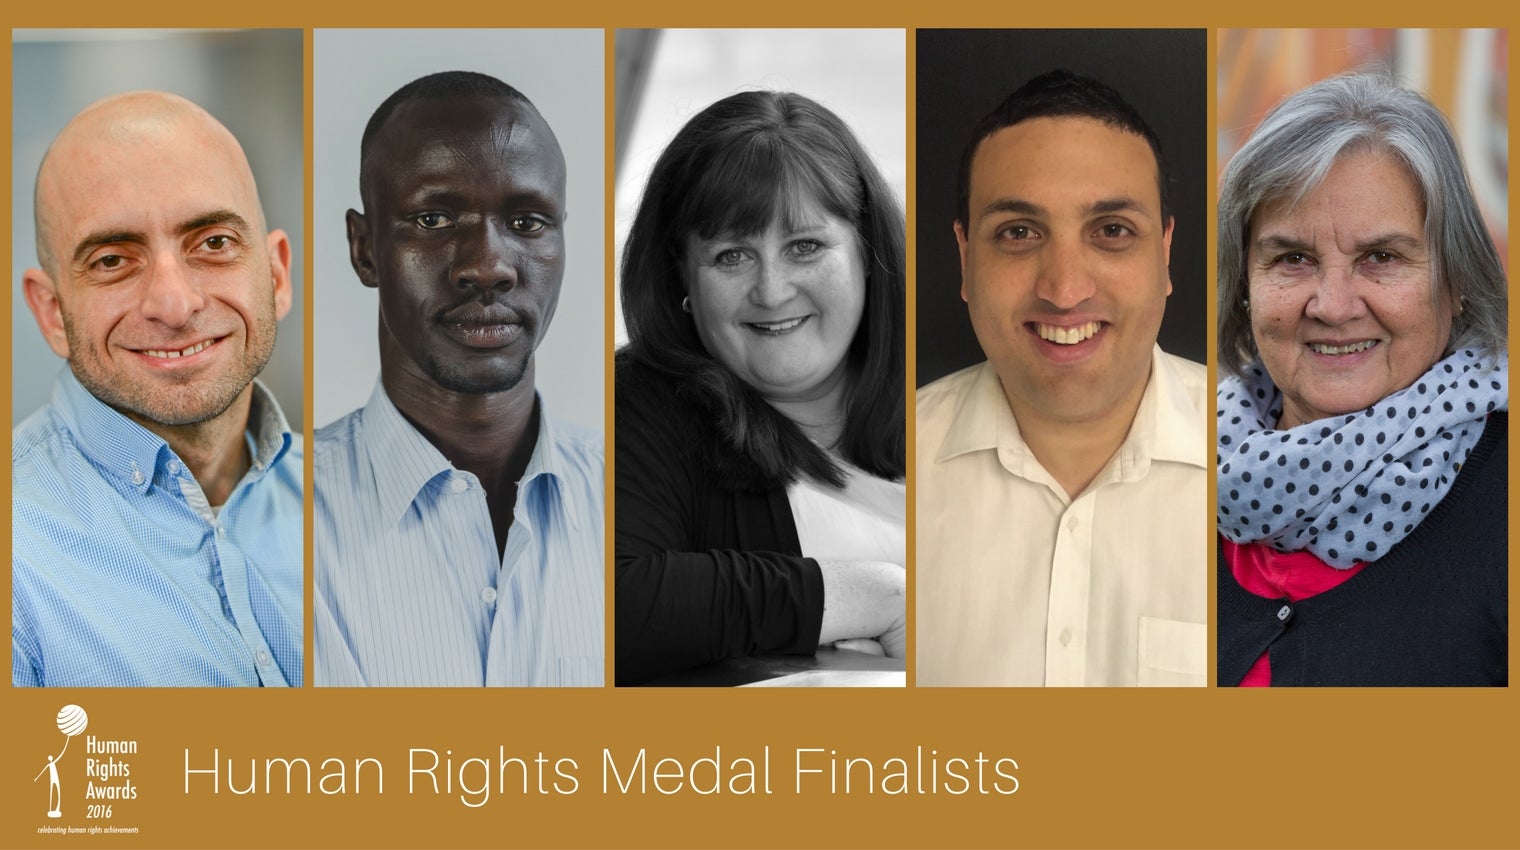 Composite of Human Rights Medal finalists 2016